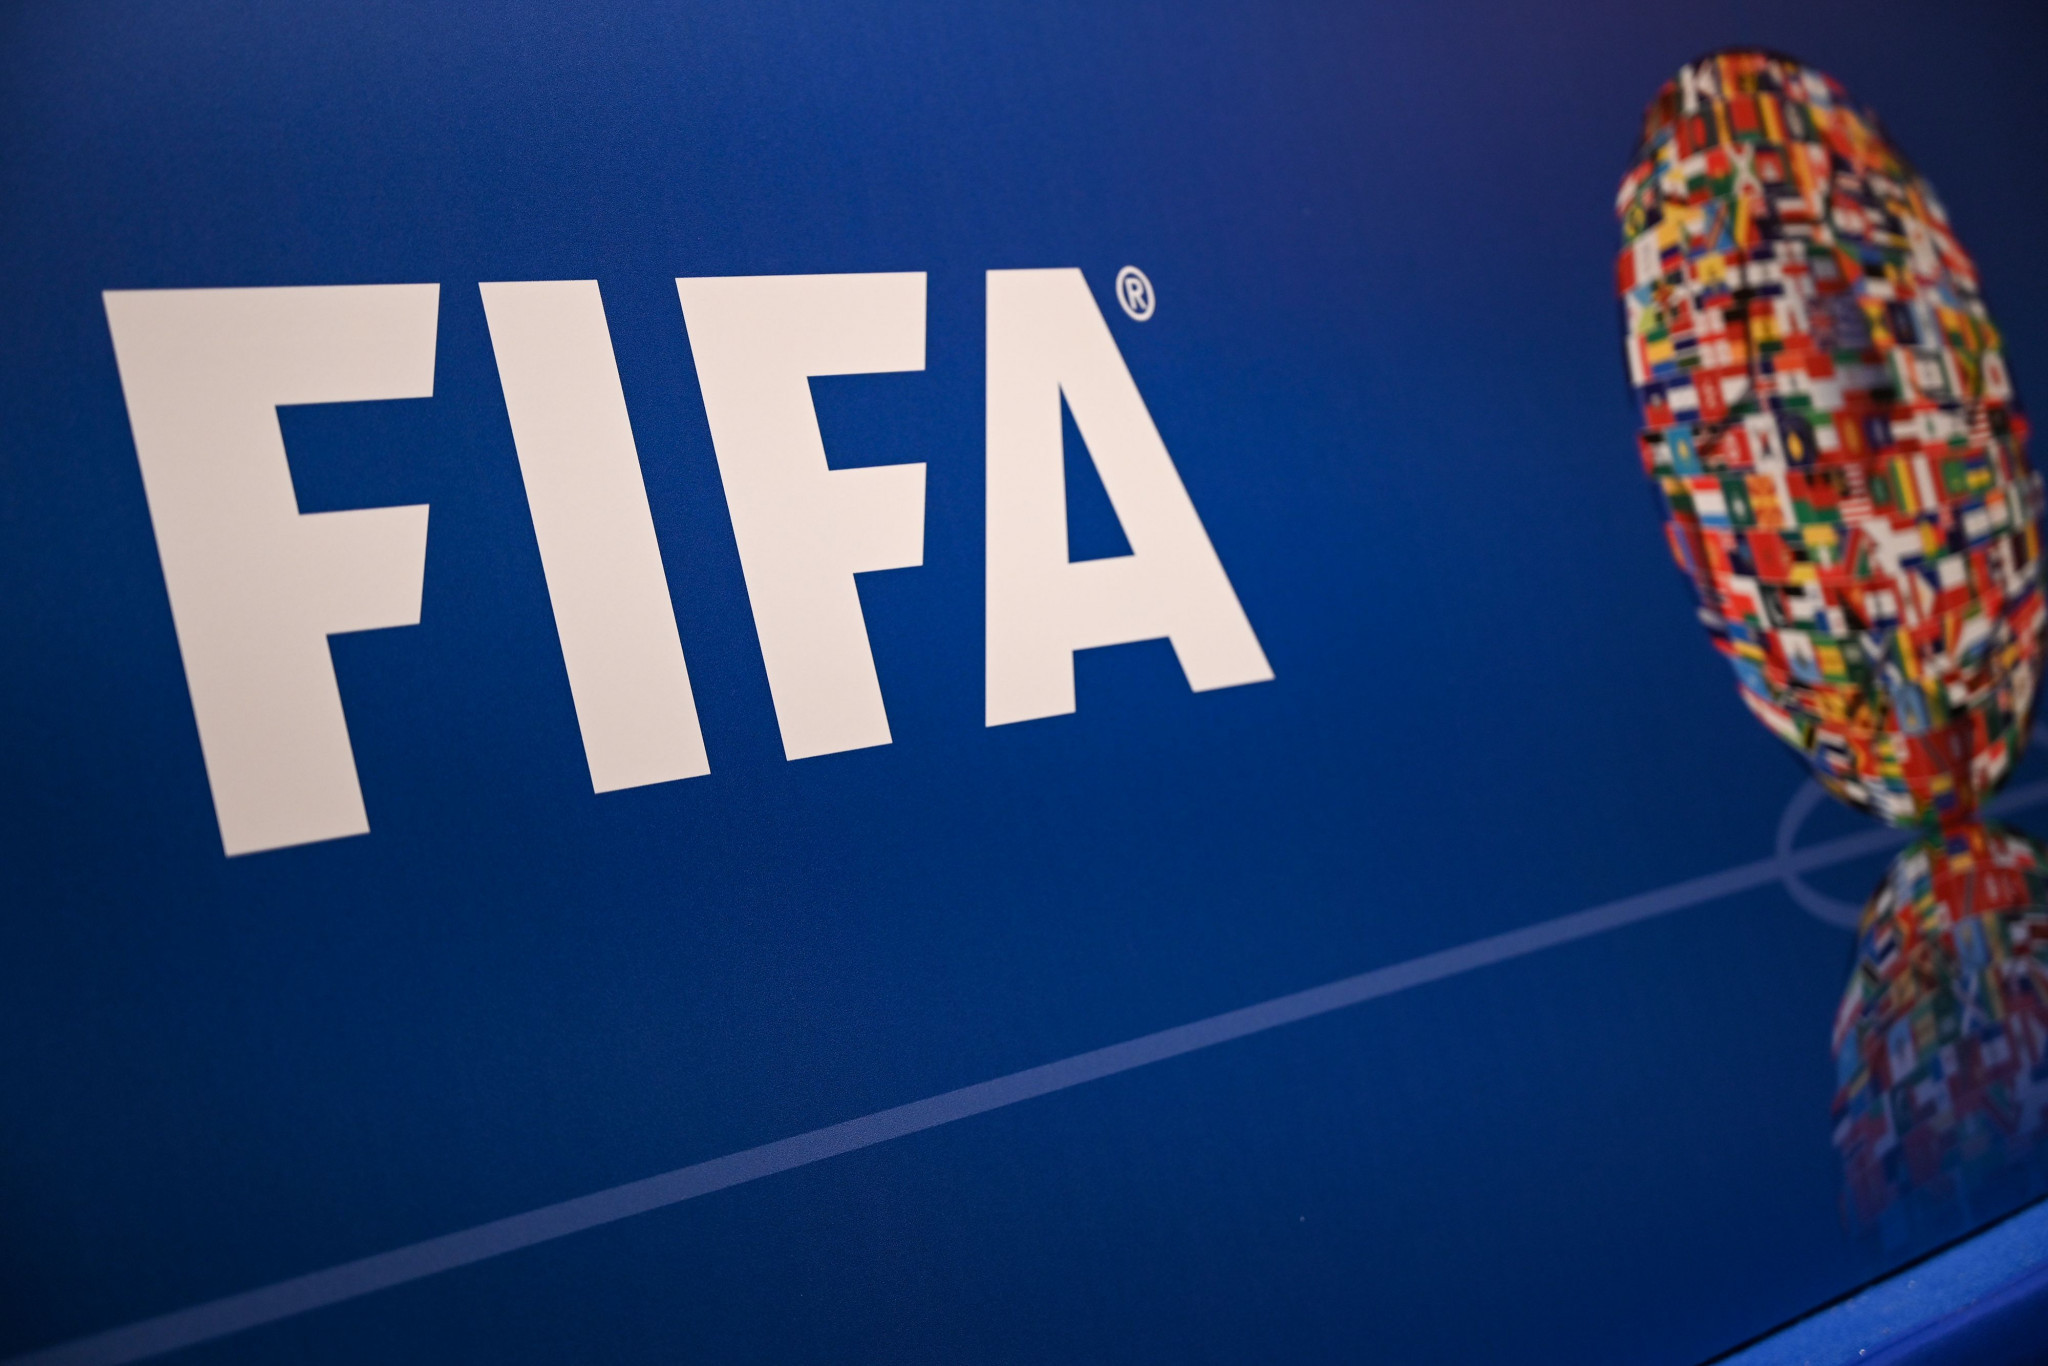 FIFA has given the FFIRI just days to ensure its statutes fully comply with the international governing body's requirements ©Getty Images